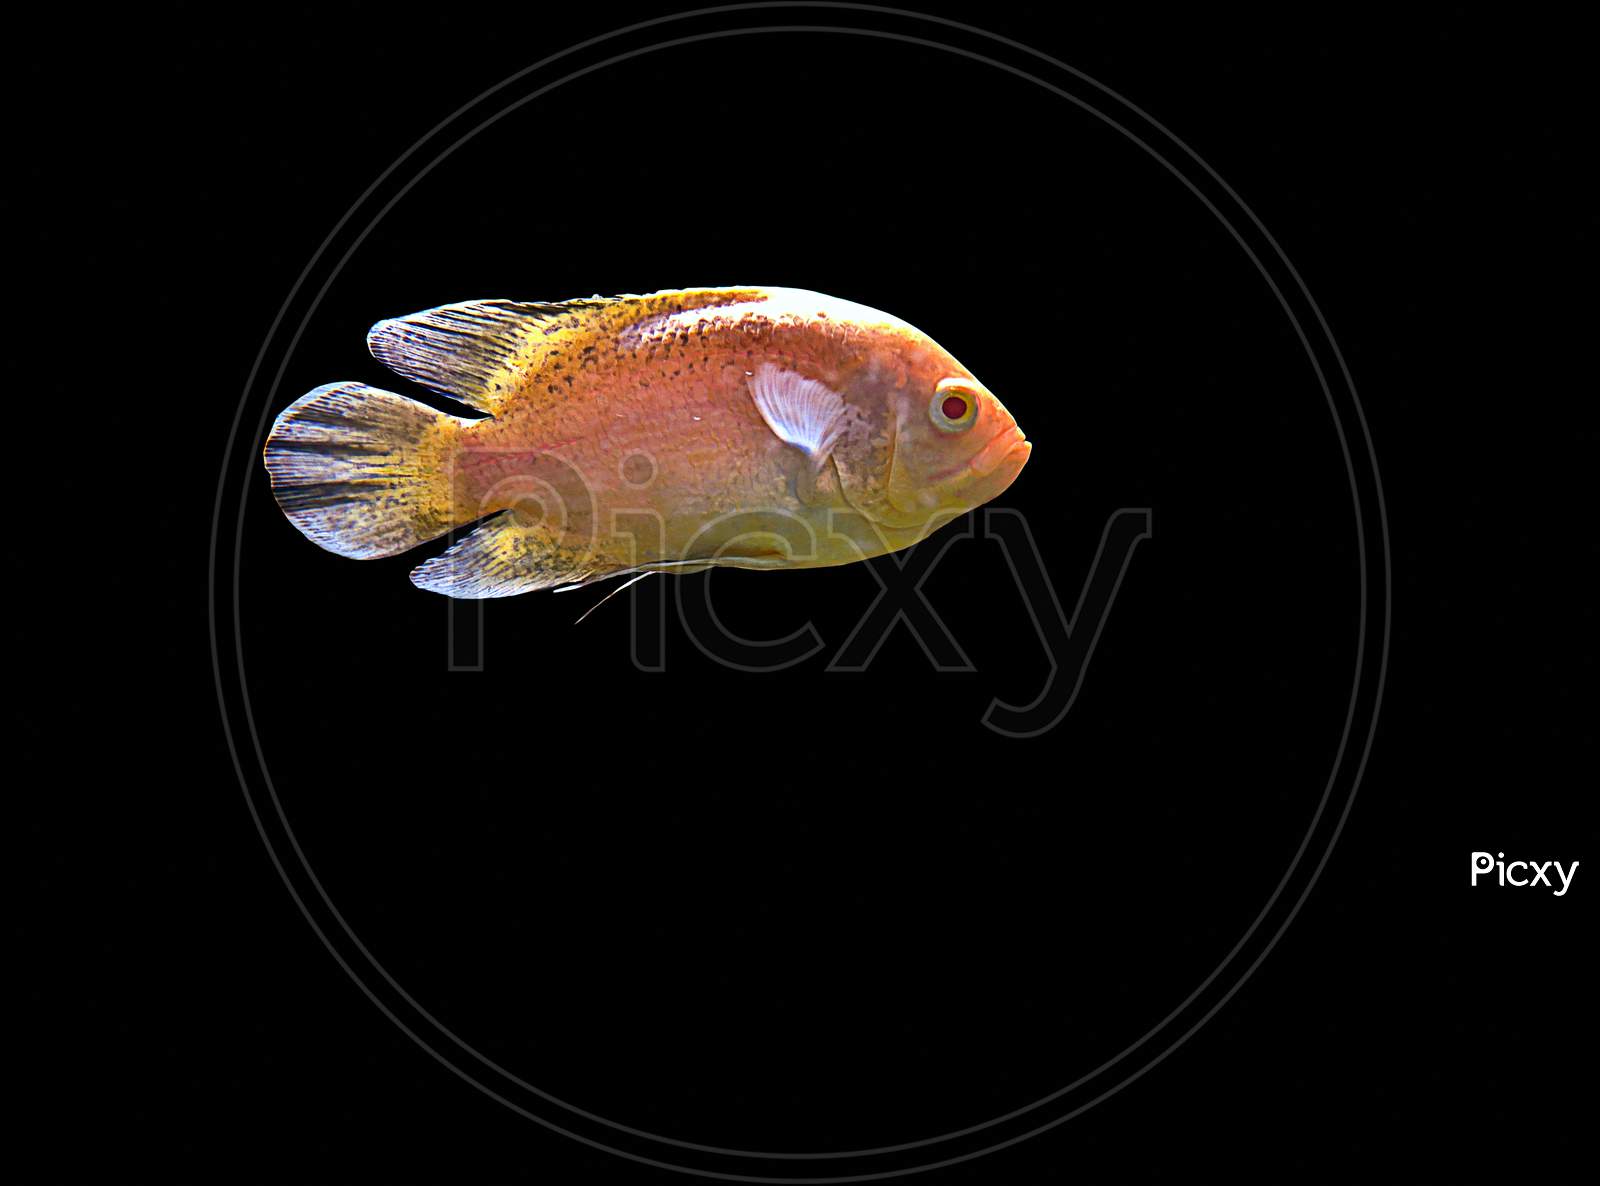 Astronotus Ocellatus Fish Also Known As Oscar Fish Isolated On Black Background.